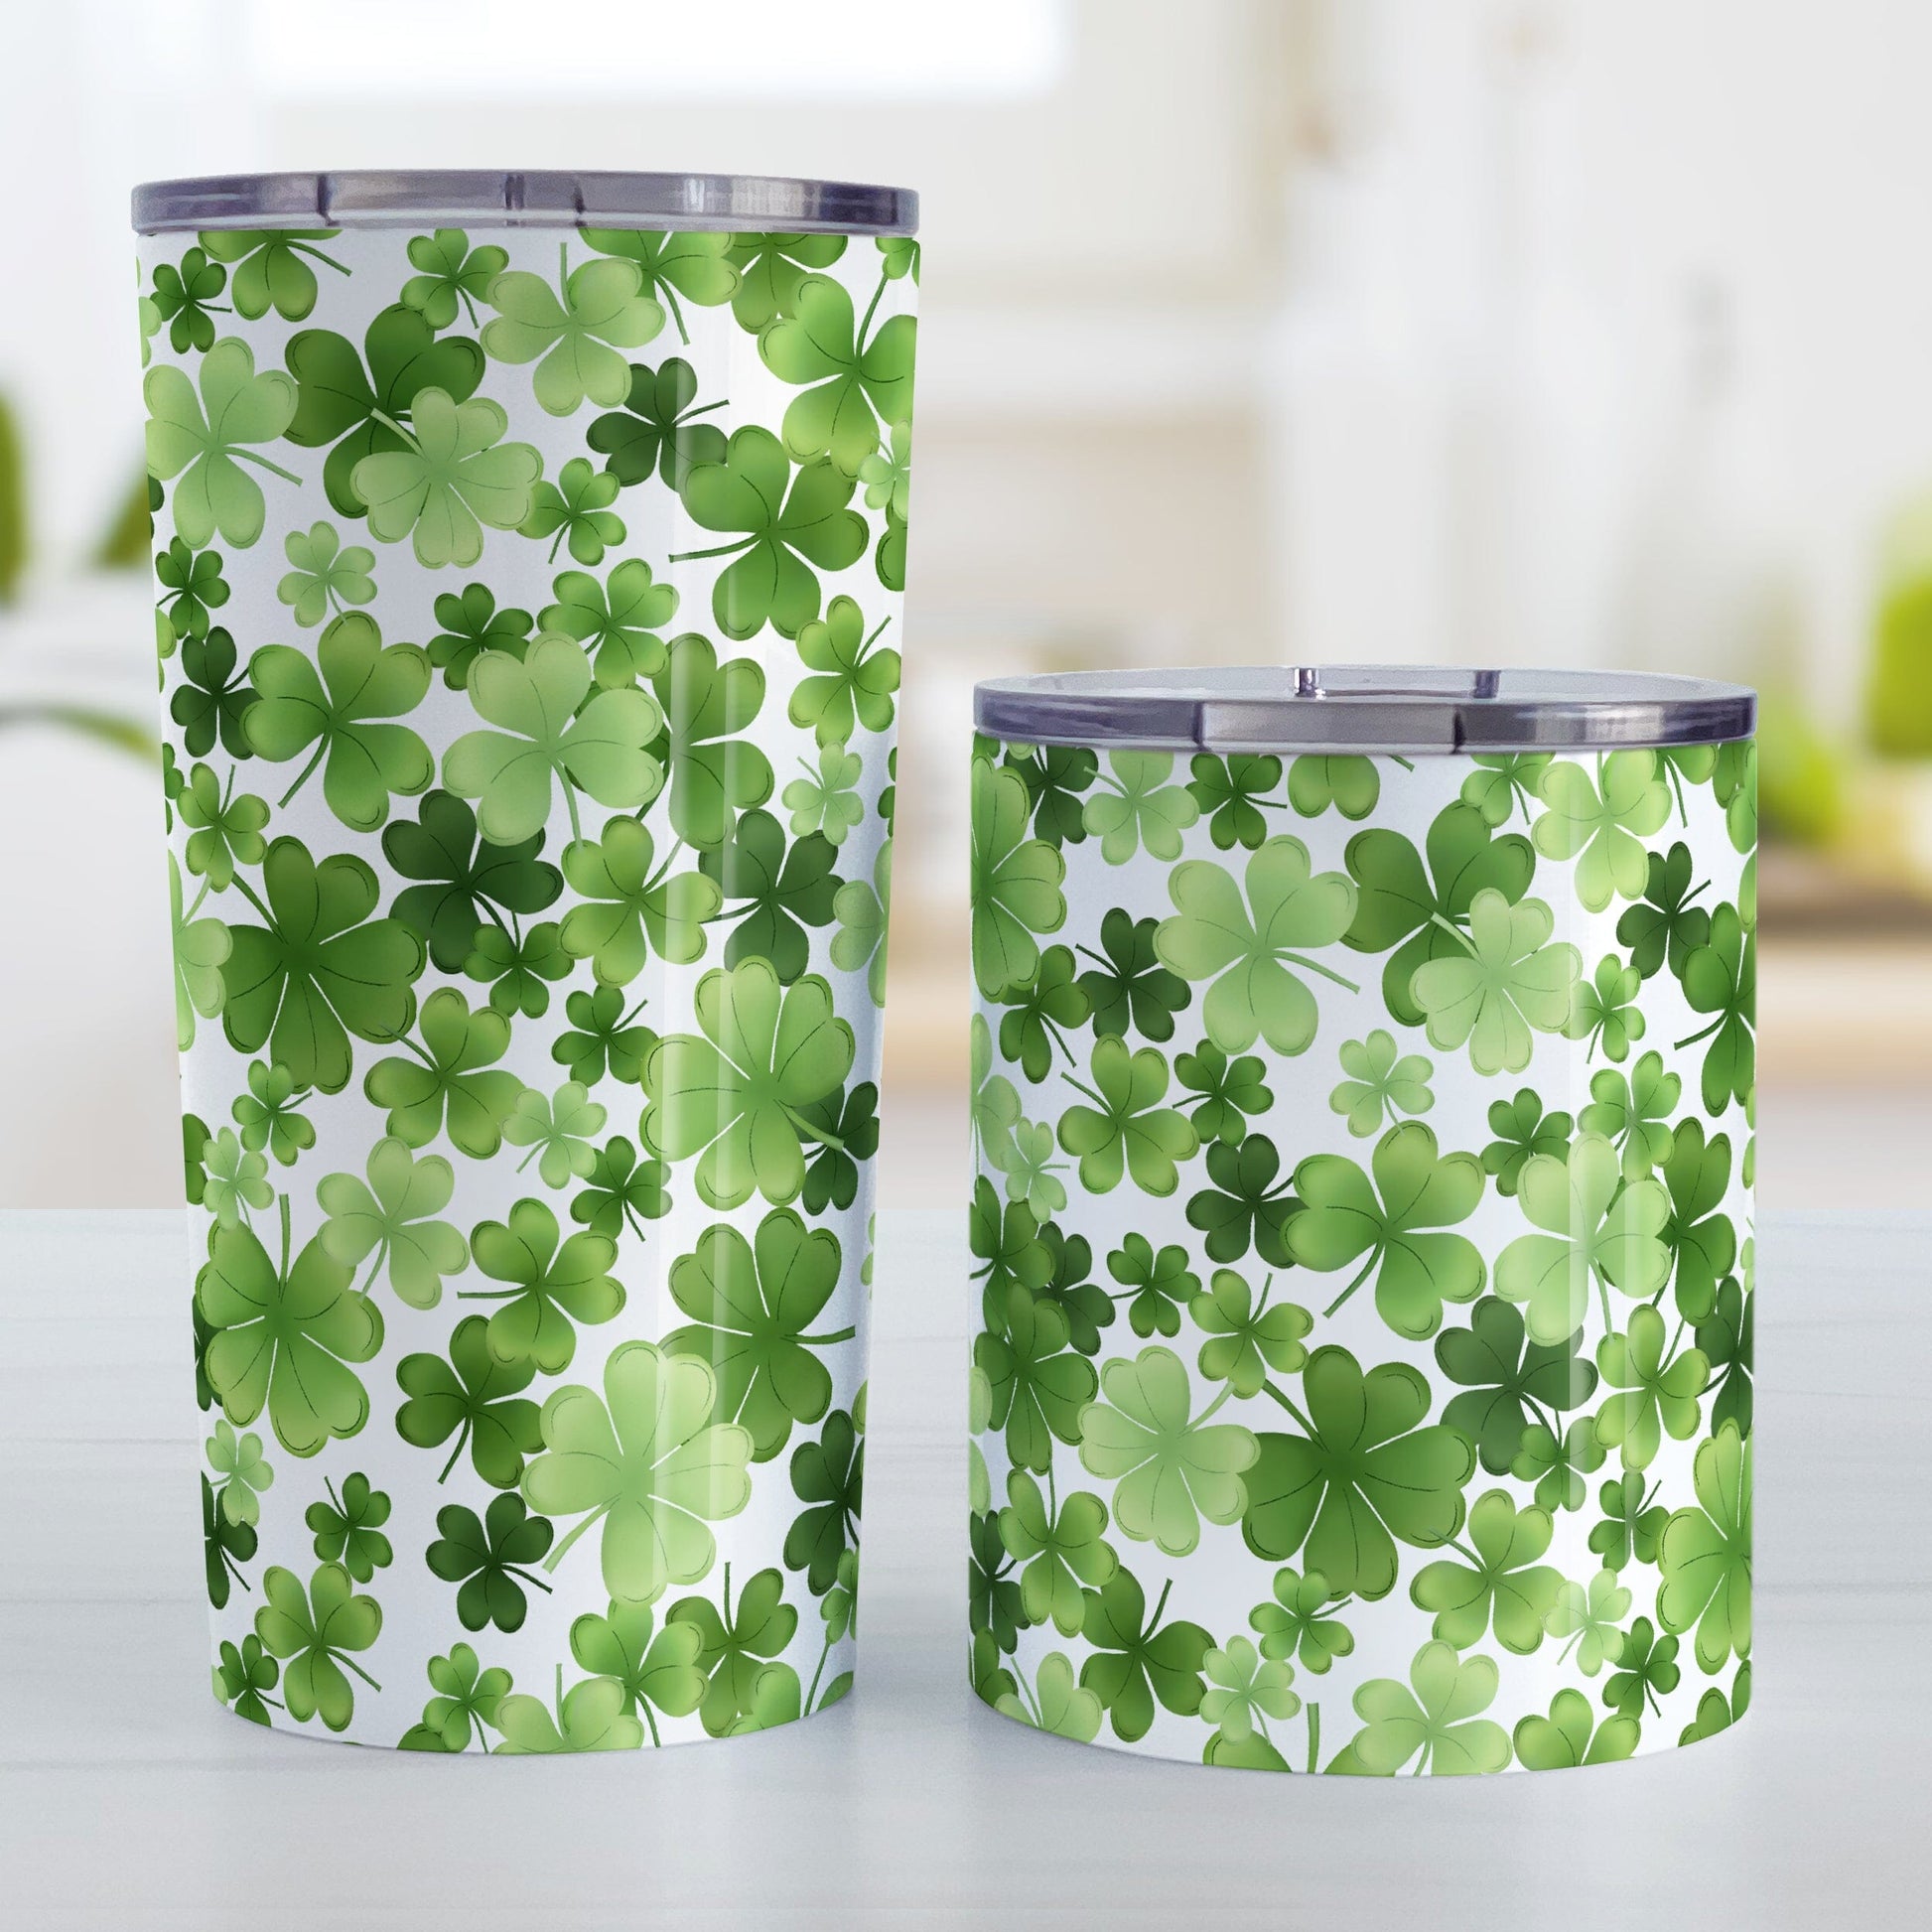 Shamrocks and 4-Leaf Clovers Tumbler Cup (20oz or 10oz) at Amy's Coffee Mugs. Stainless steel insulated tumbler cups designed with an organic-like pattern of green shamrocks and 4-leaf clovers in different shades of green that wraps around the cups. Photo shows both sized cups on a table next to each other.